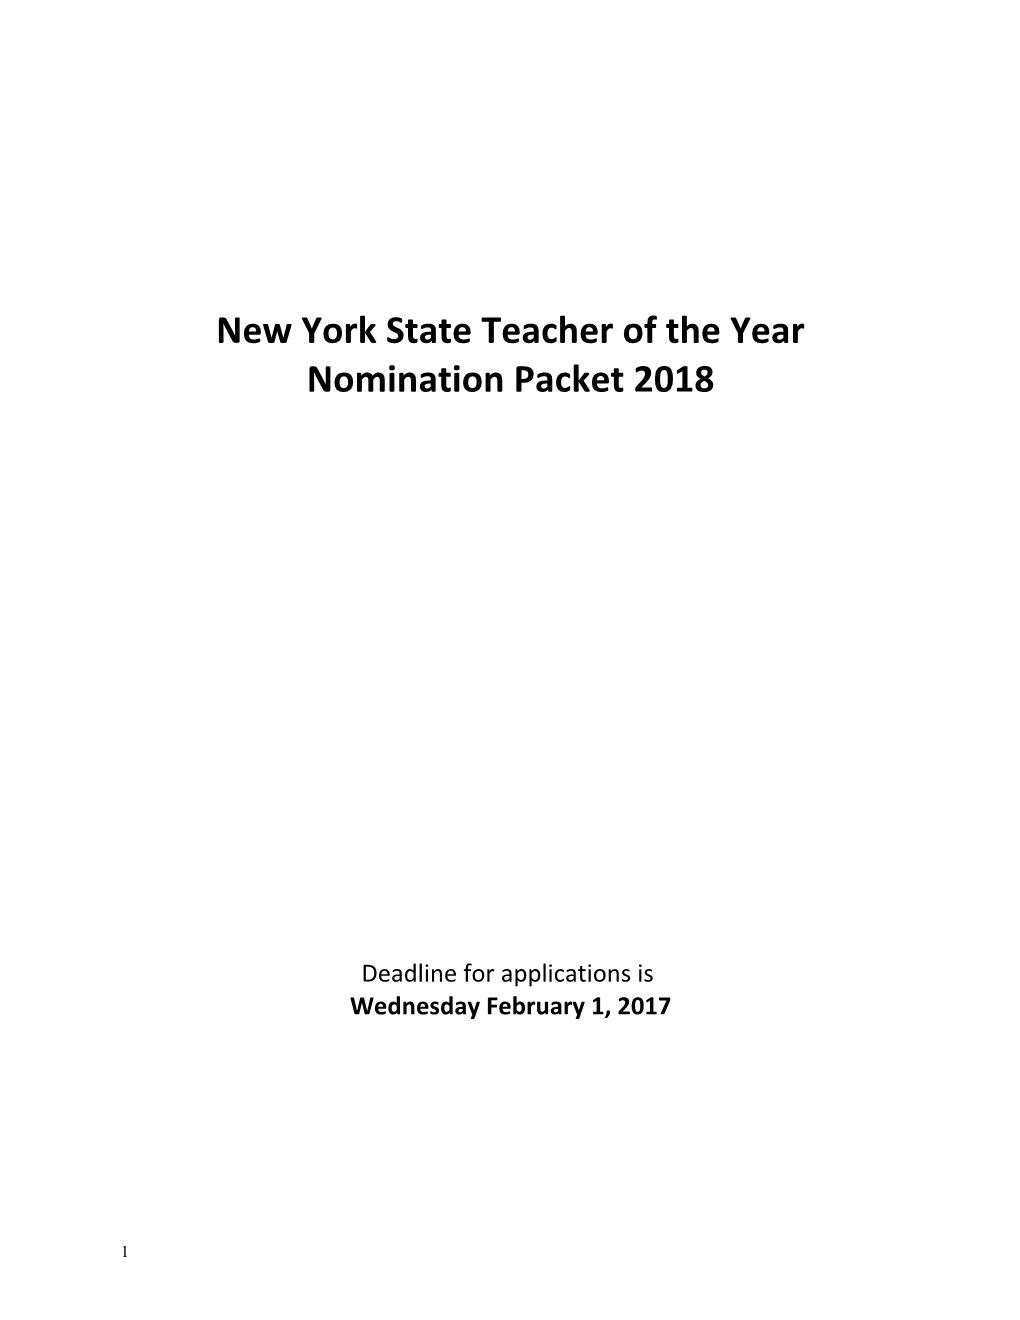 New York State Teacher Of The Year Nomination Packet 2015